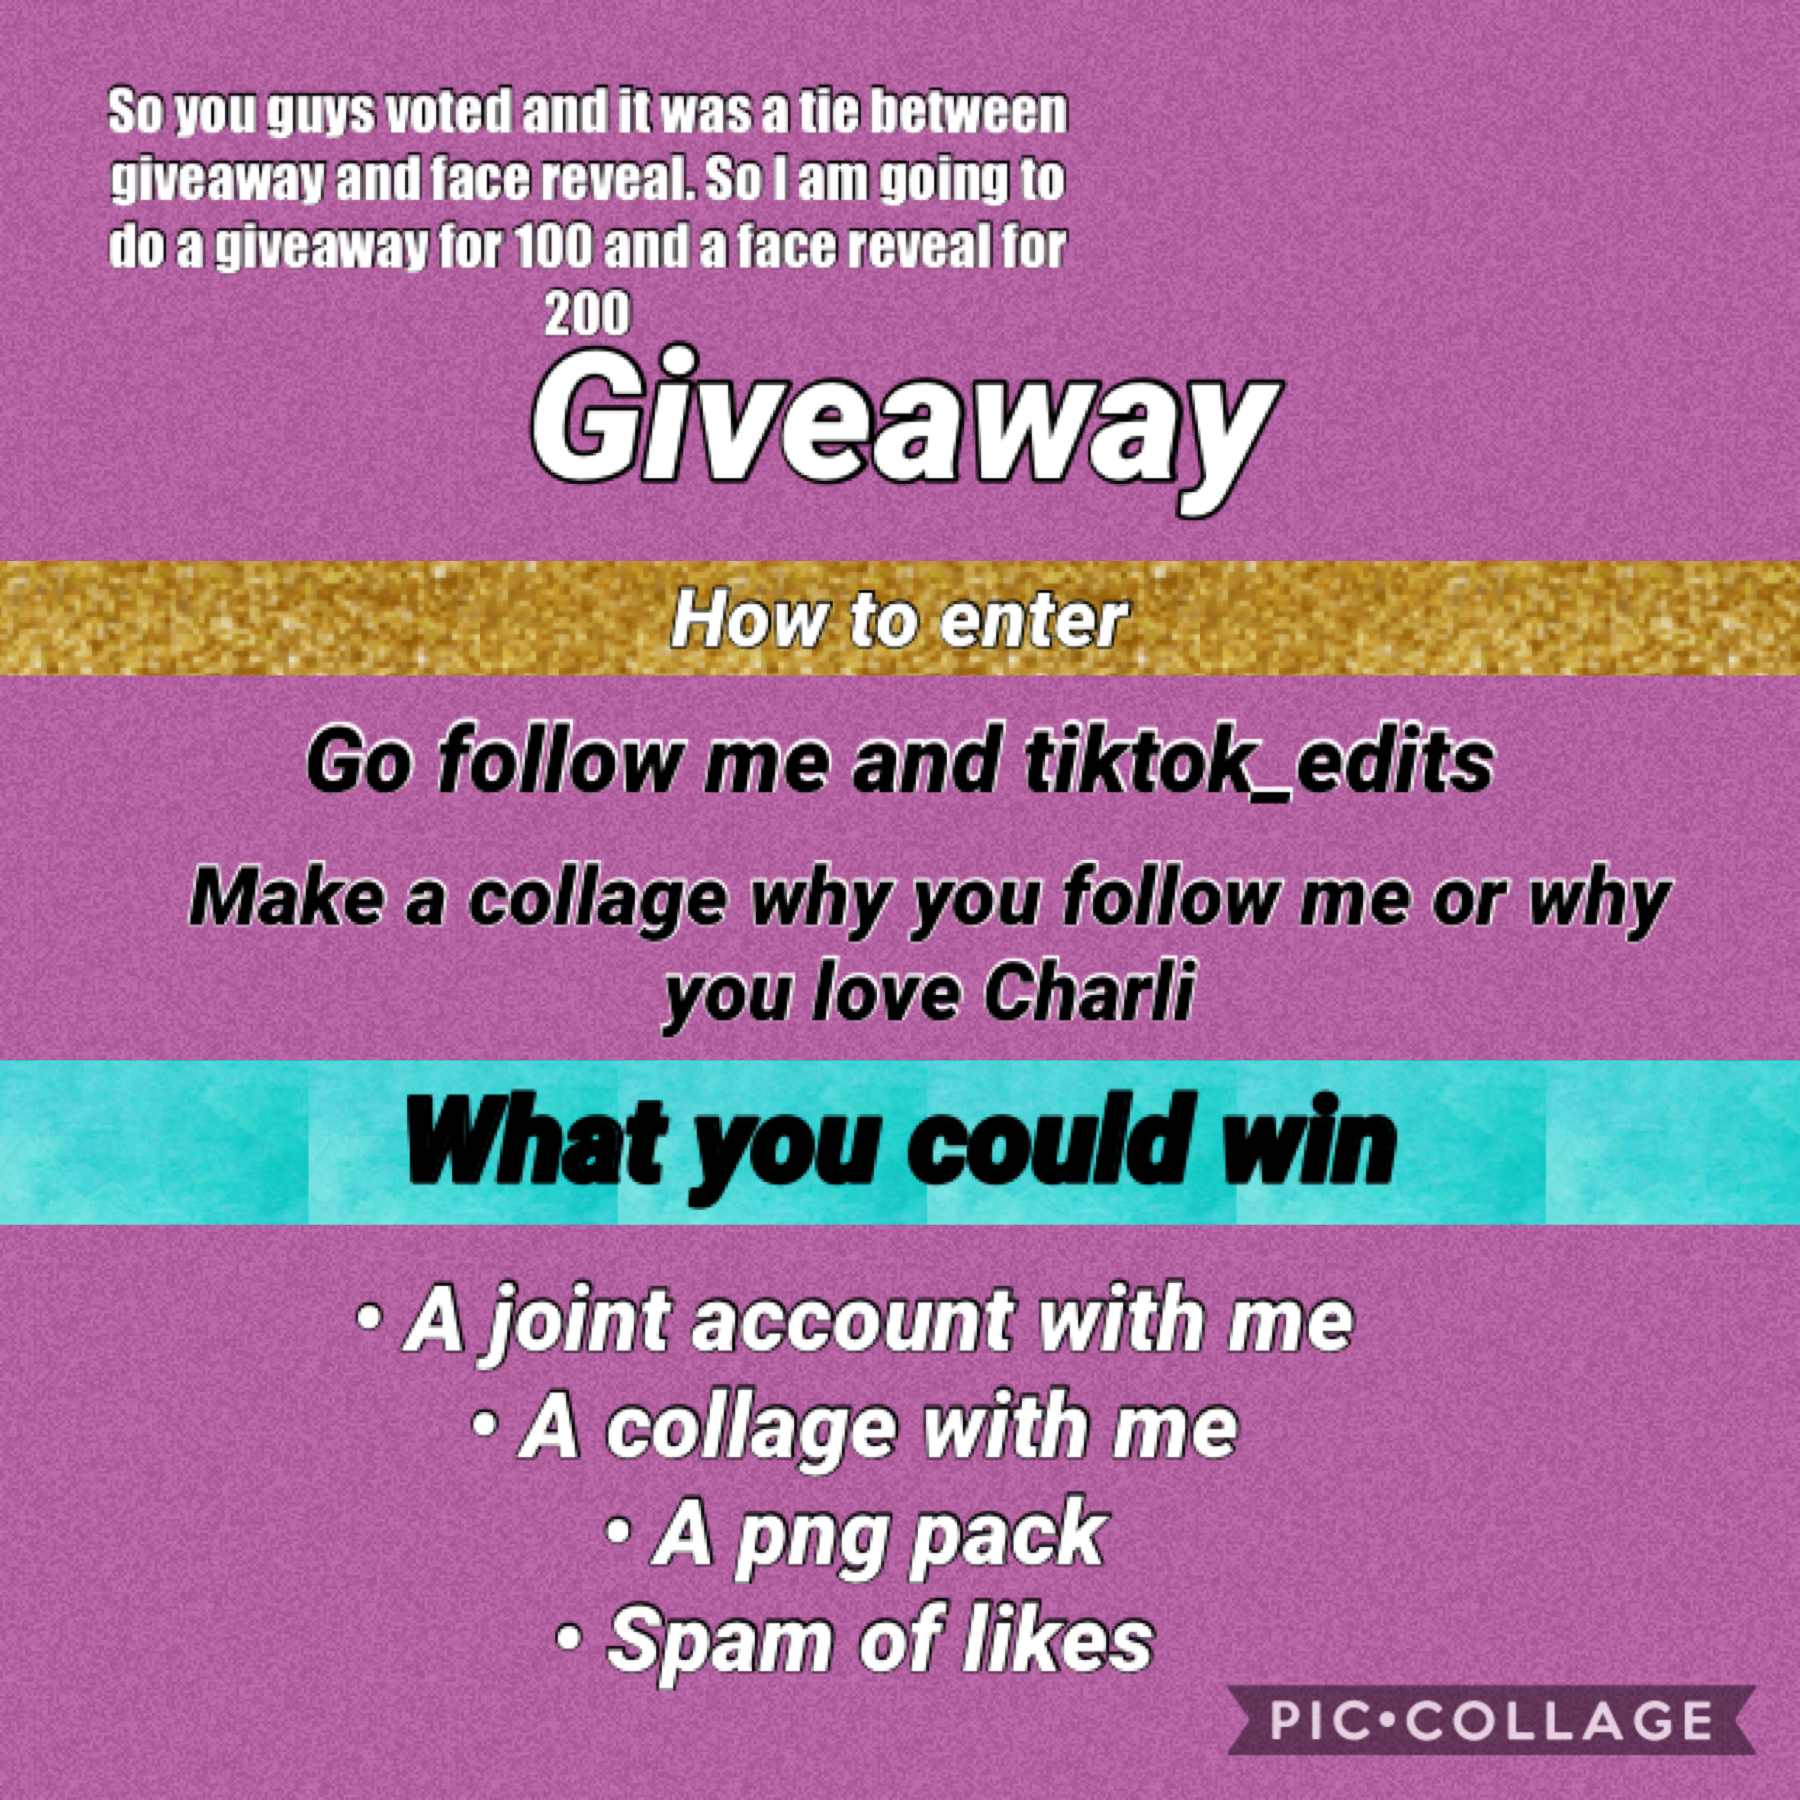 Tap
Thank you for 100 followers 
Please enter the giveaway